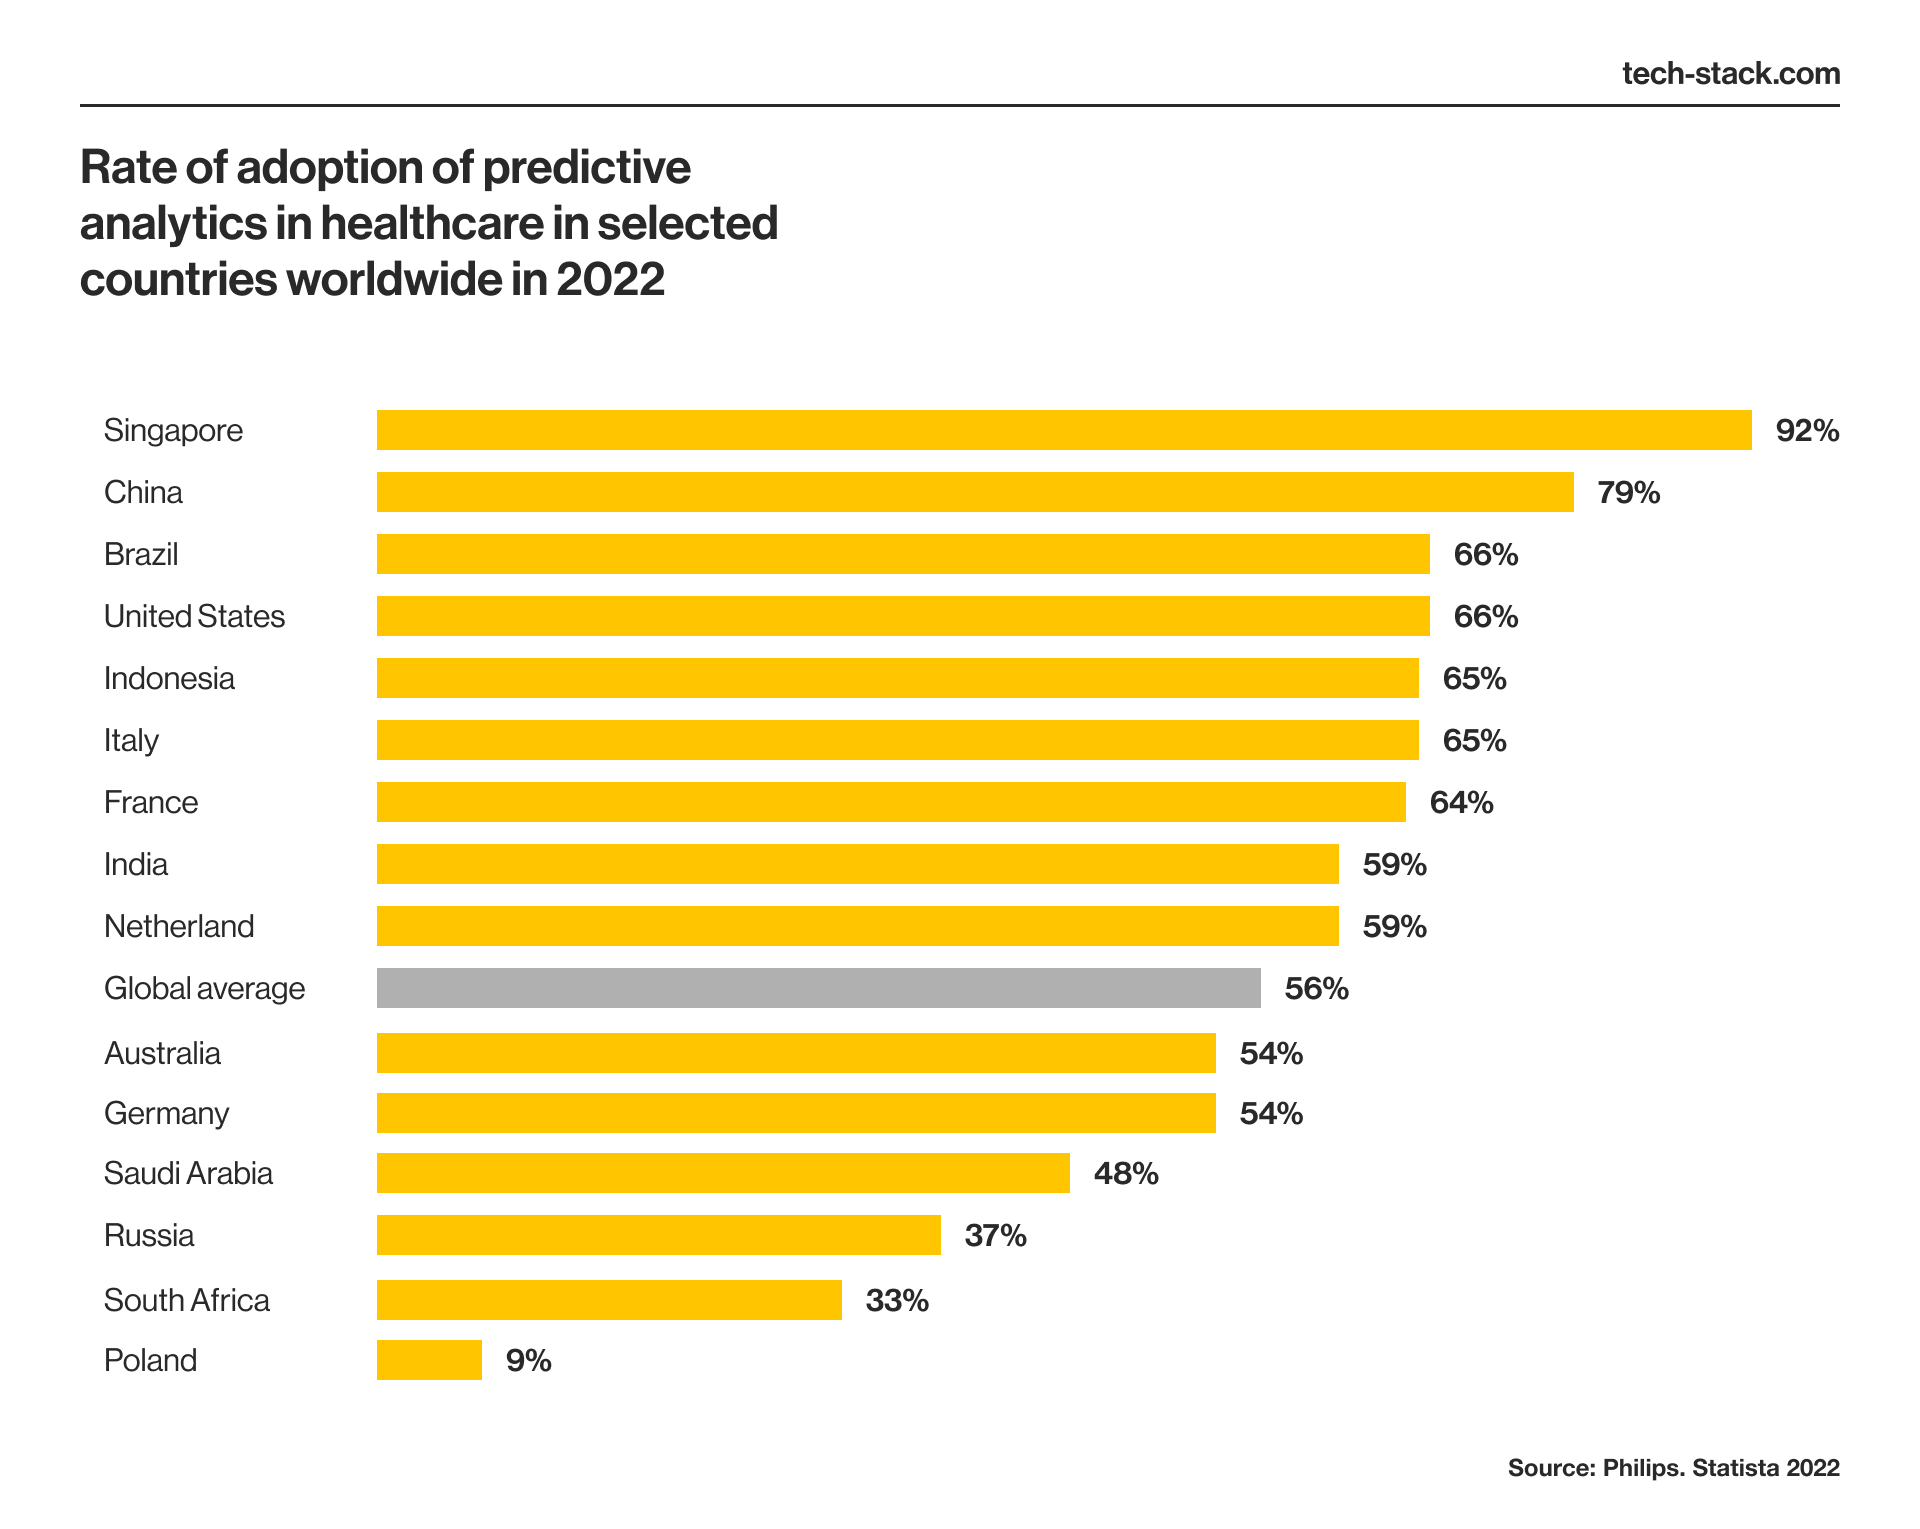 Rate of adoption of predictive analytics in healthcare